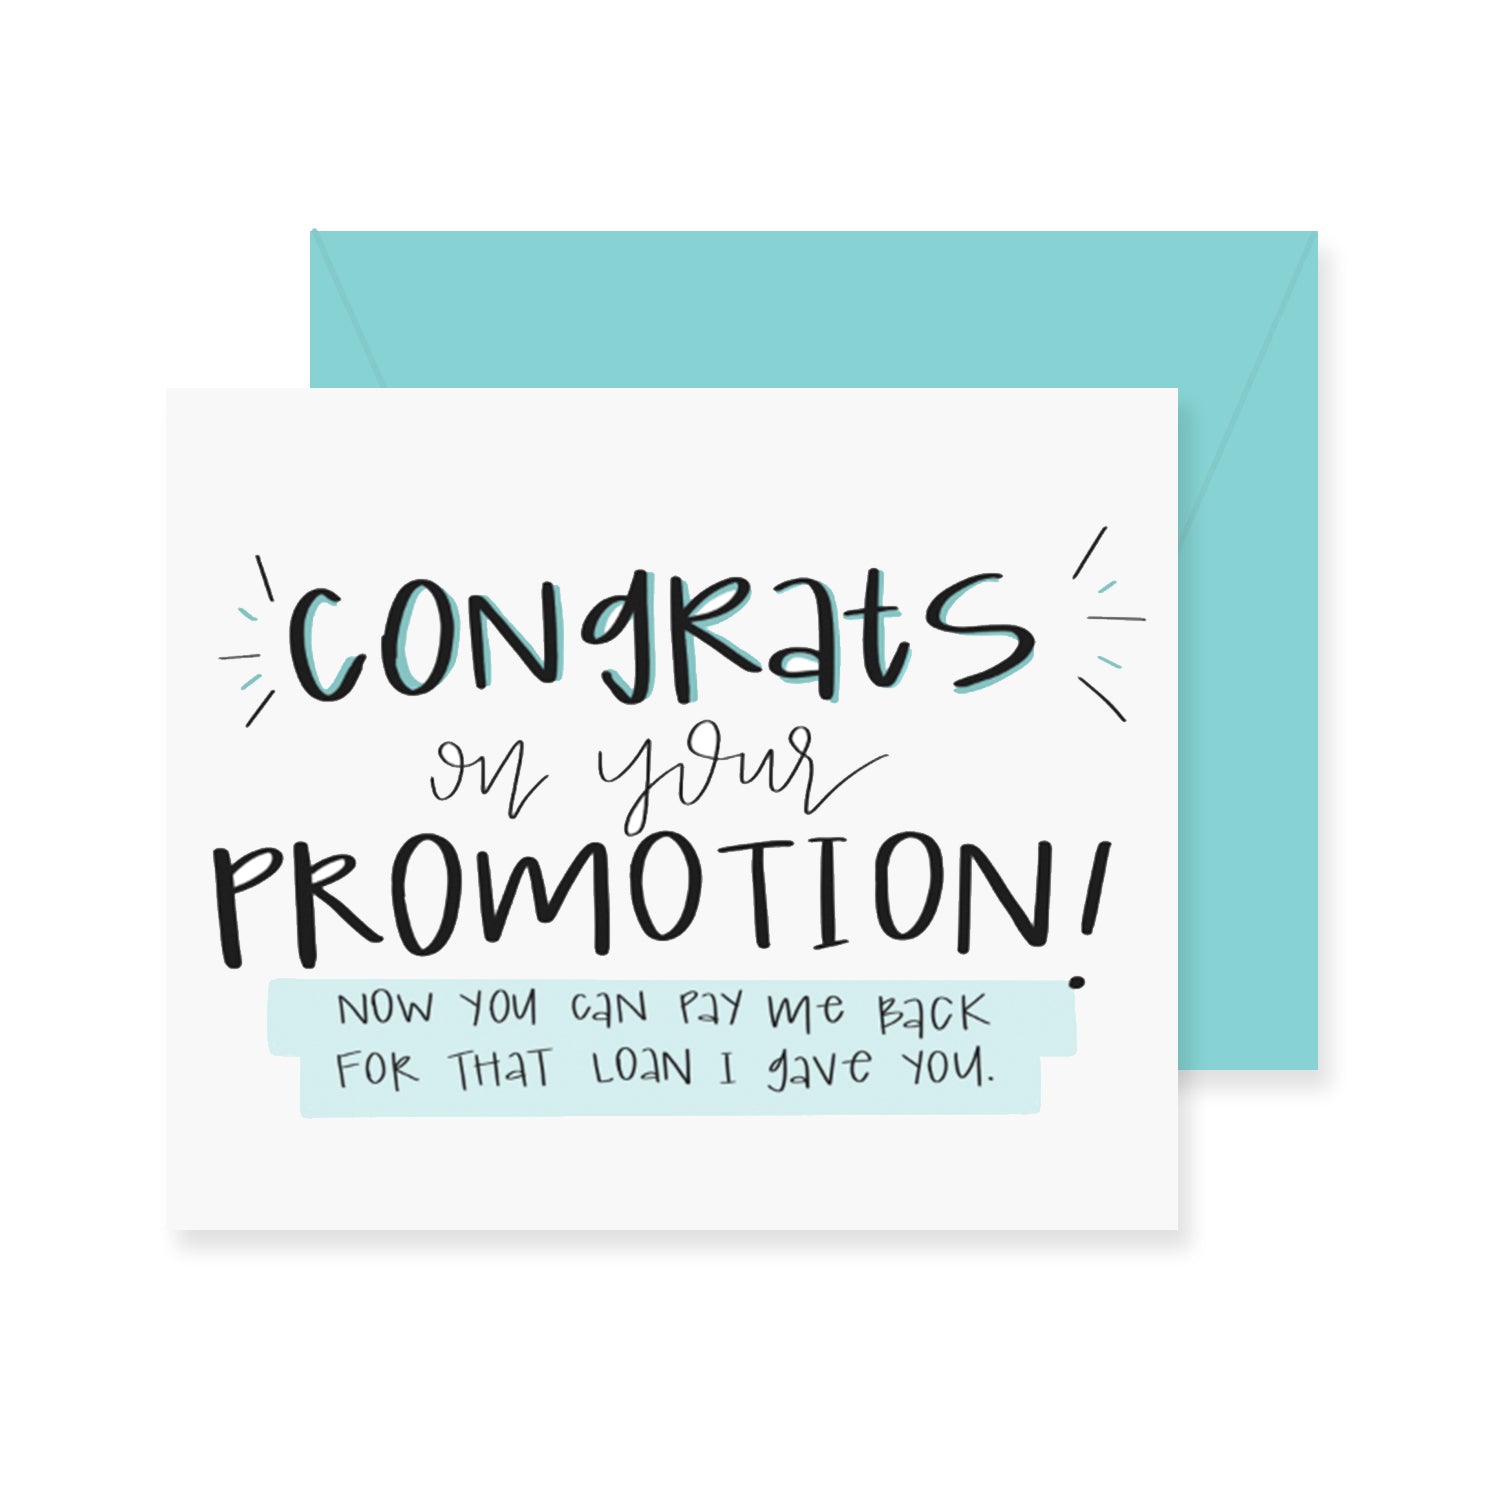 congratulations cards for promotion